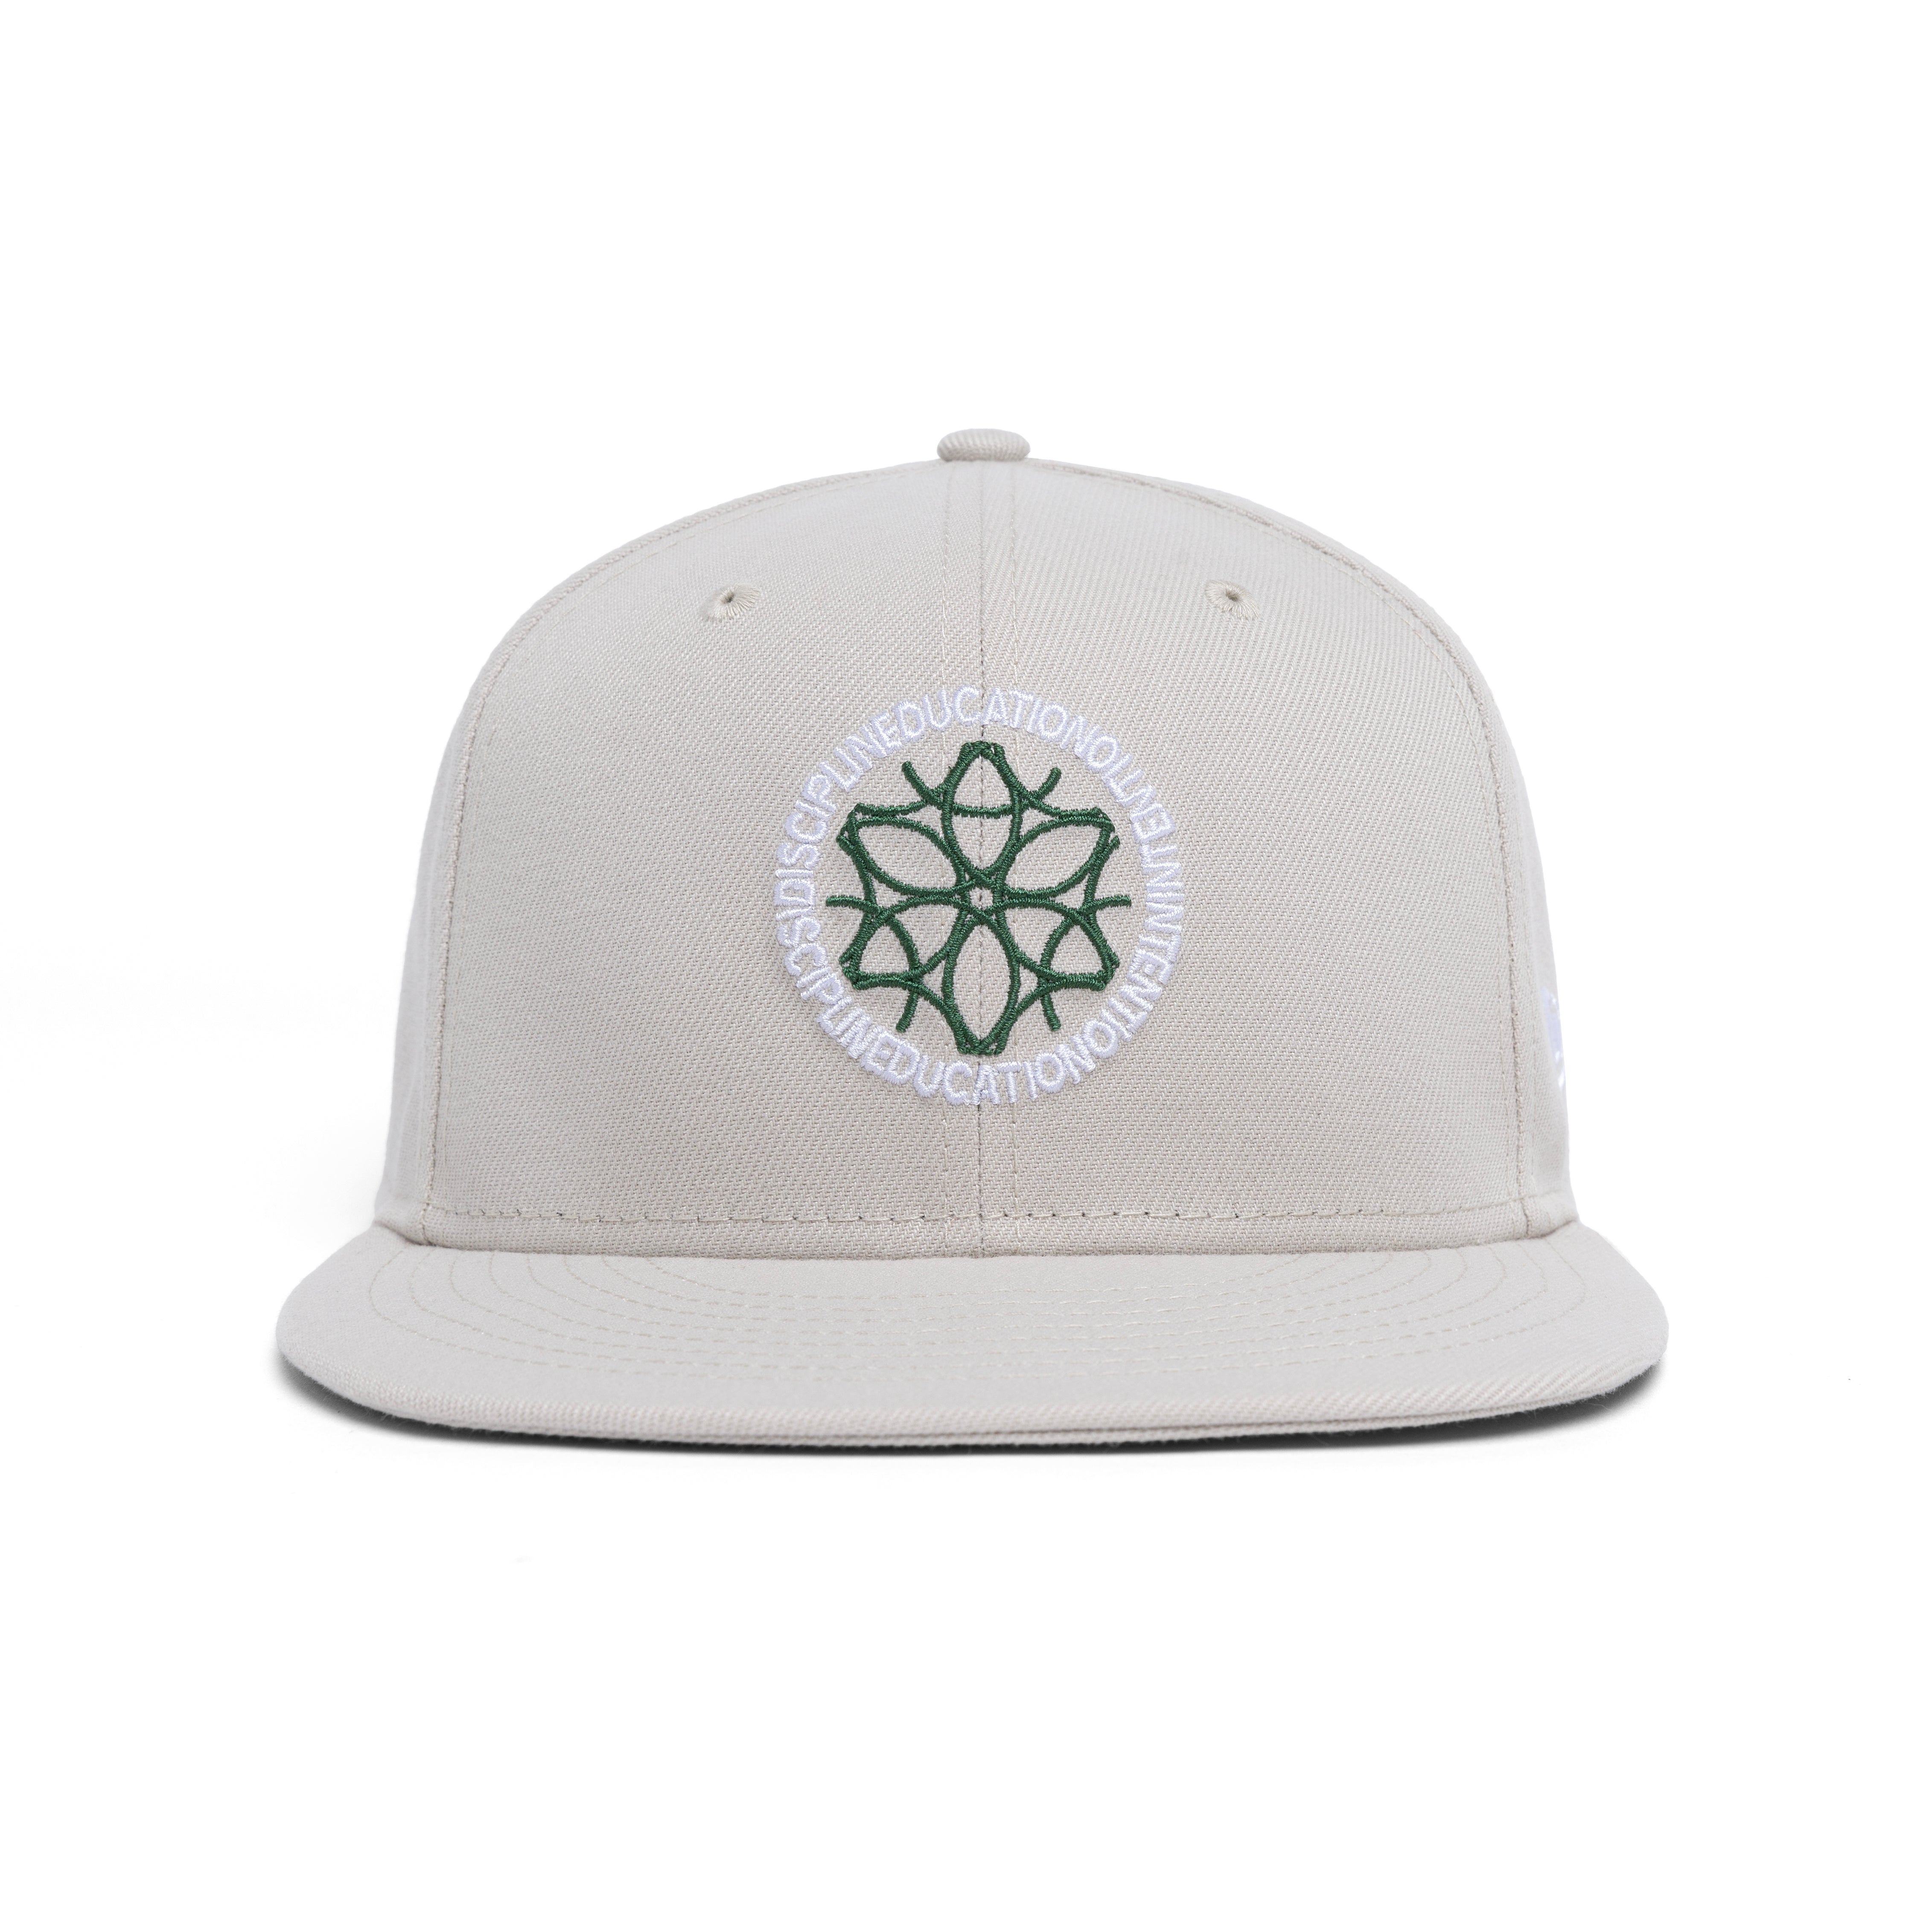 INFINITY CIRCLE FITTED - STONE [HAWAII EXCLUSIVE]